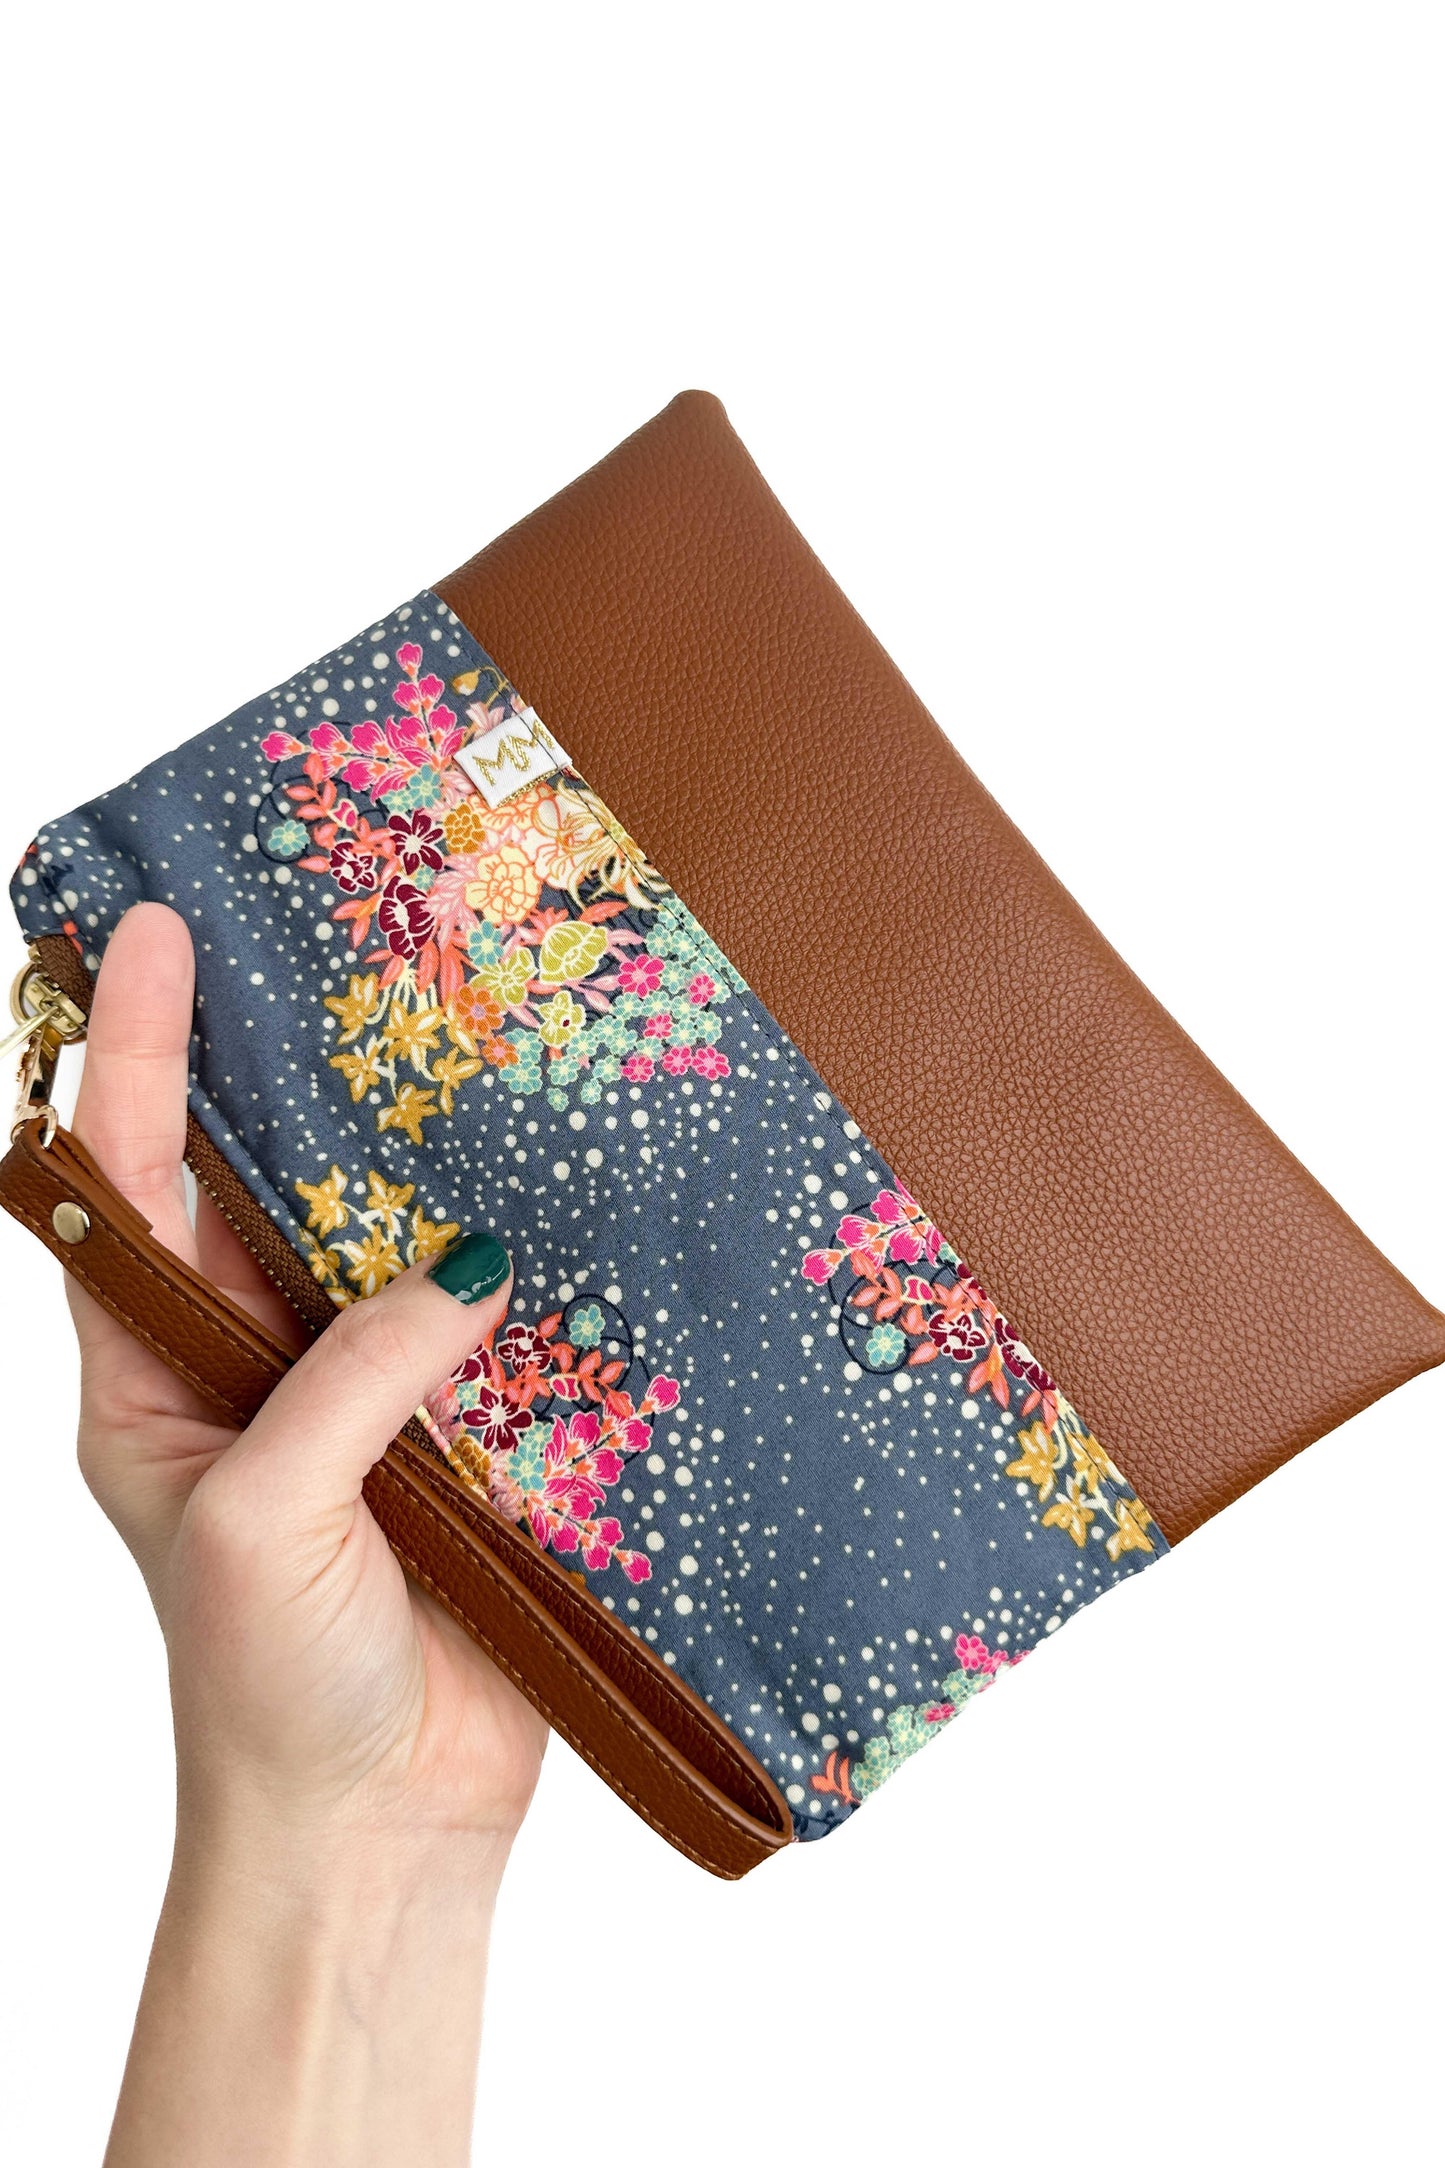 Indie Folk Convertible Crossbody Wristlet+ with Compartments READY TO SHIP - Modern Makerie